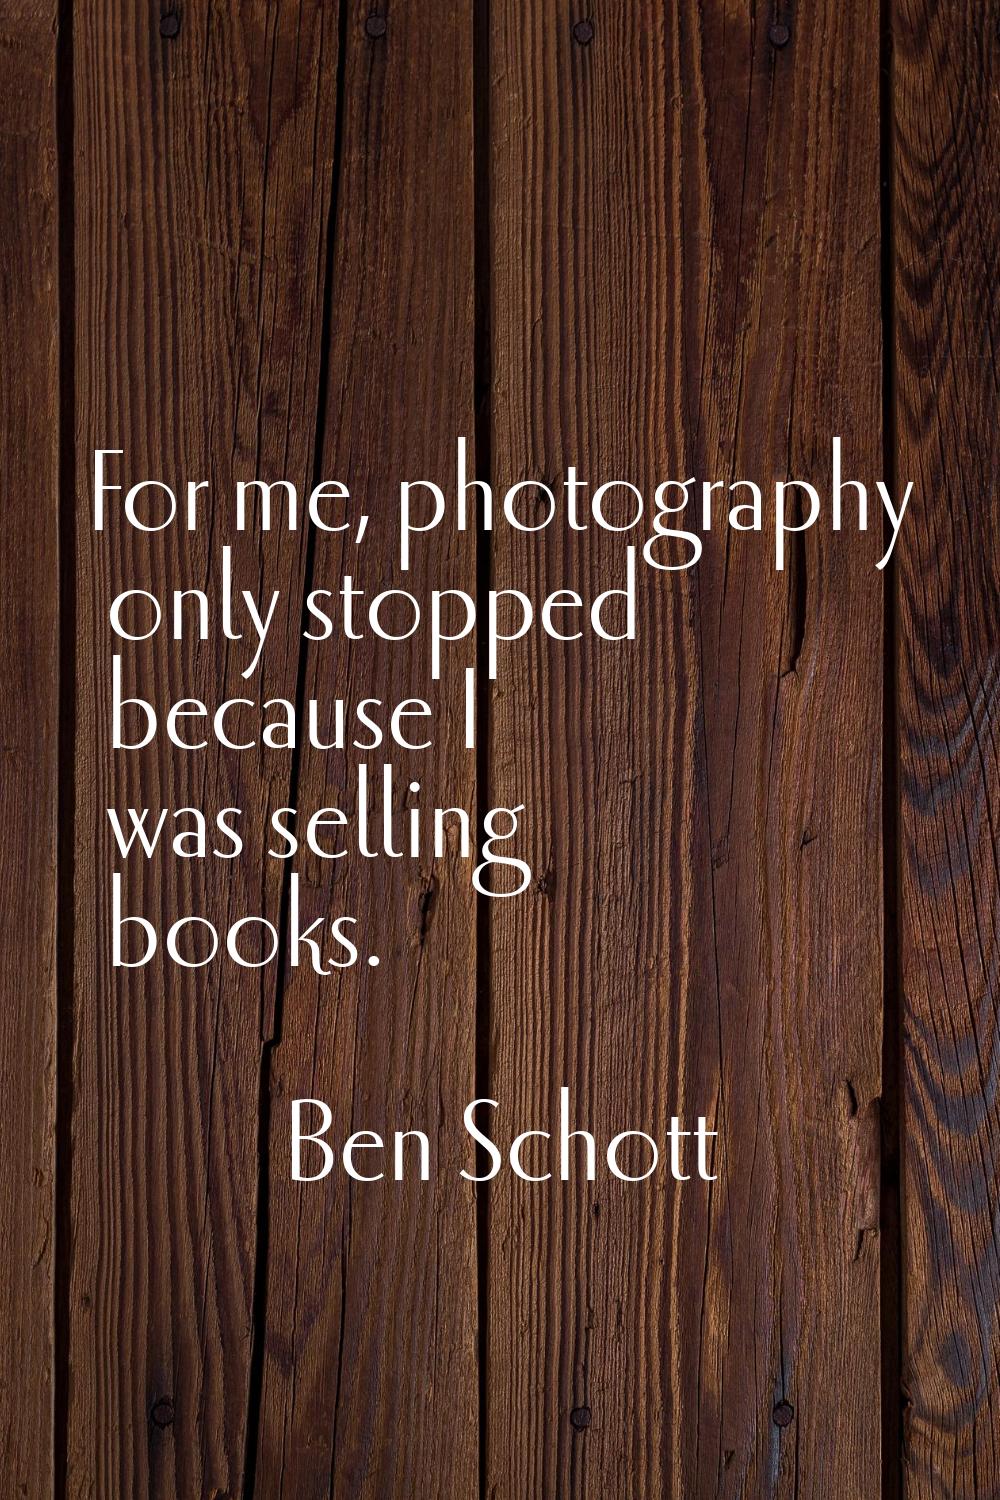 For me, photography only stopped because I was selling books.